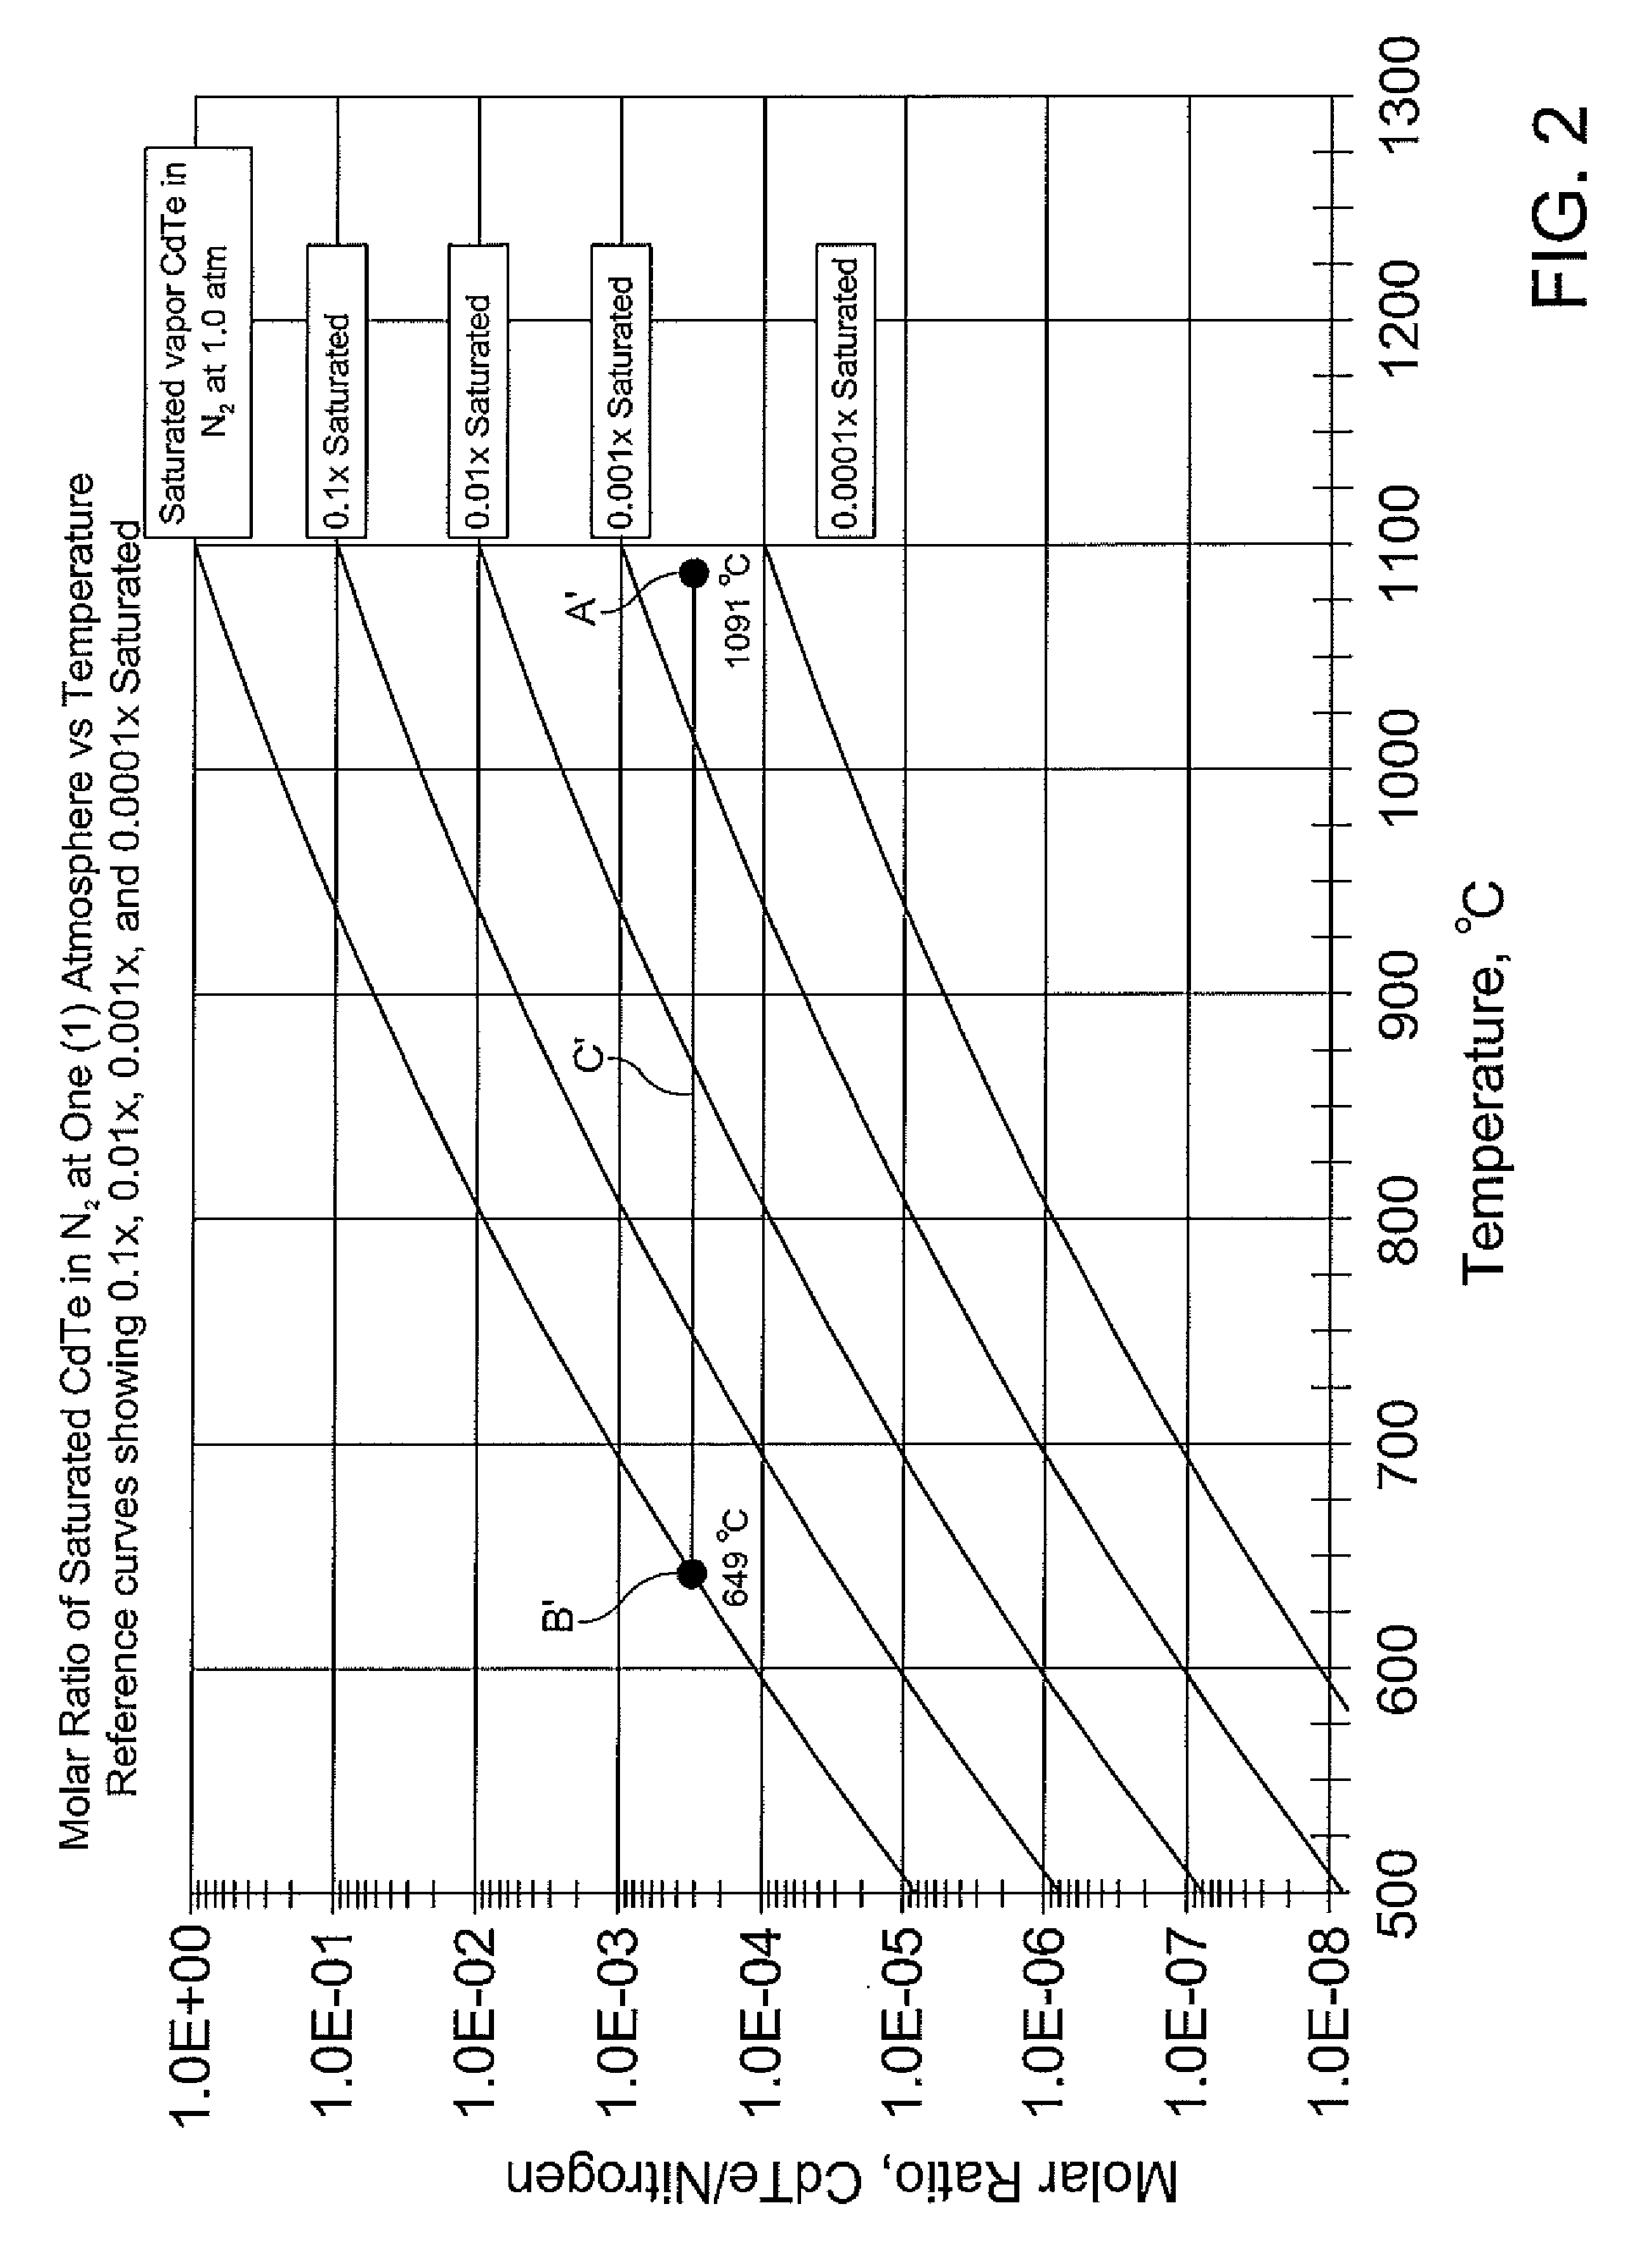 Atmospheric pressure chemical vapor deposition with saturation control